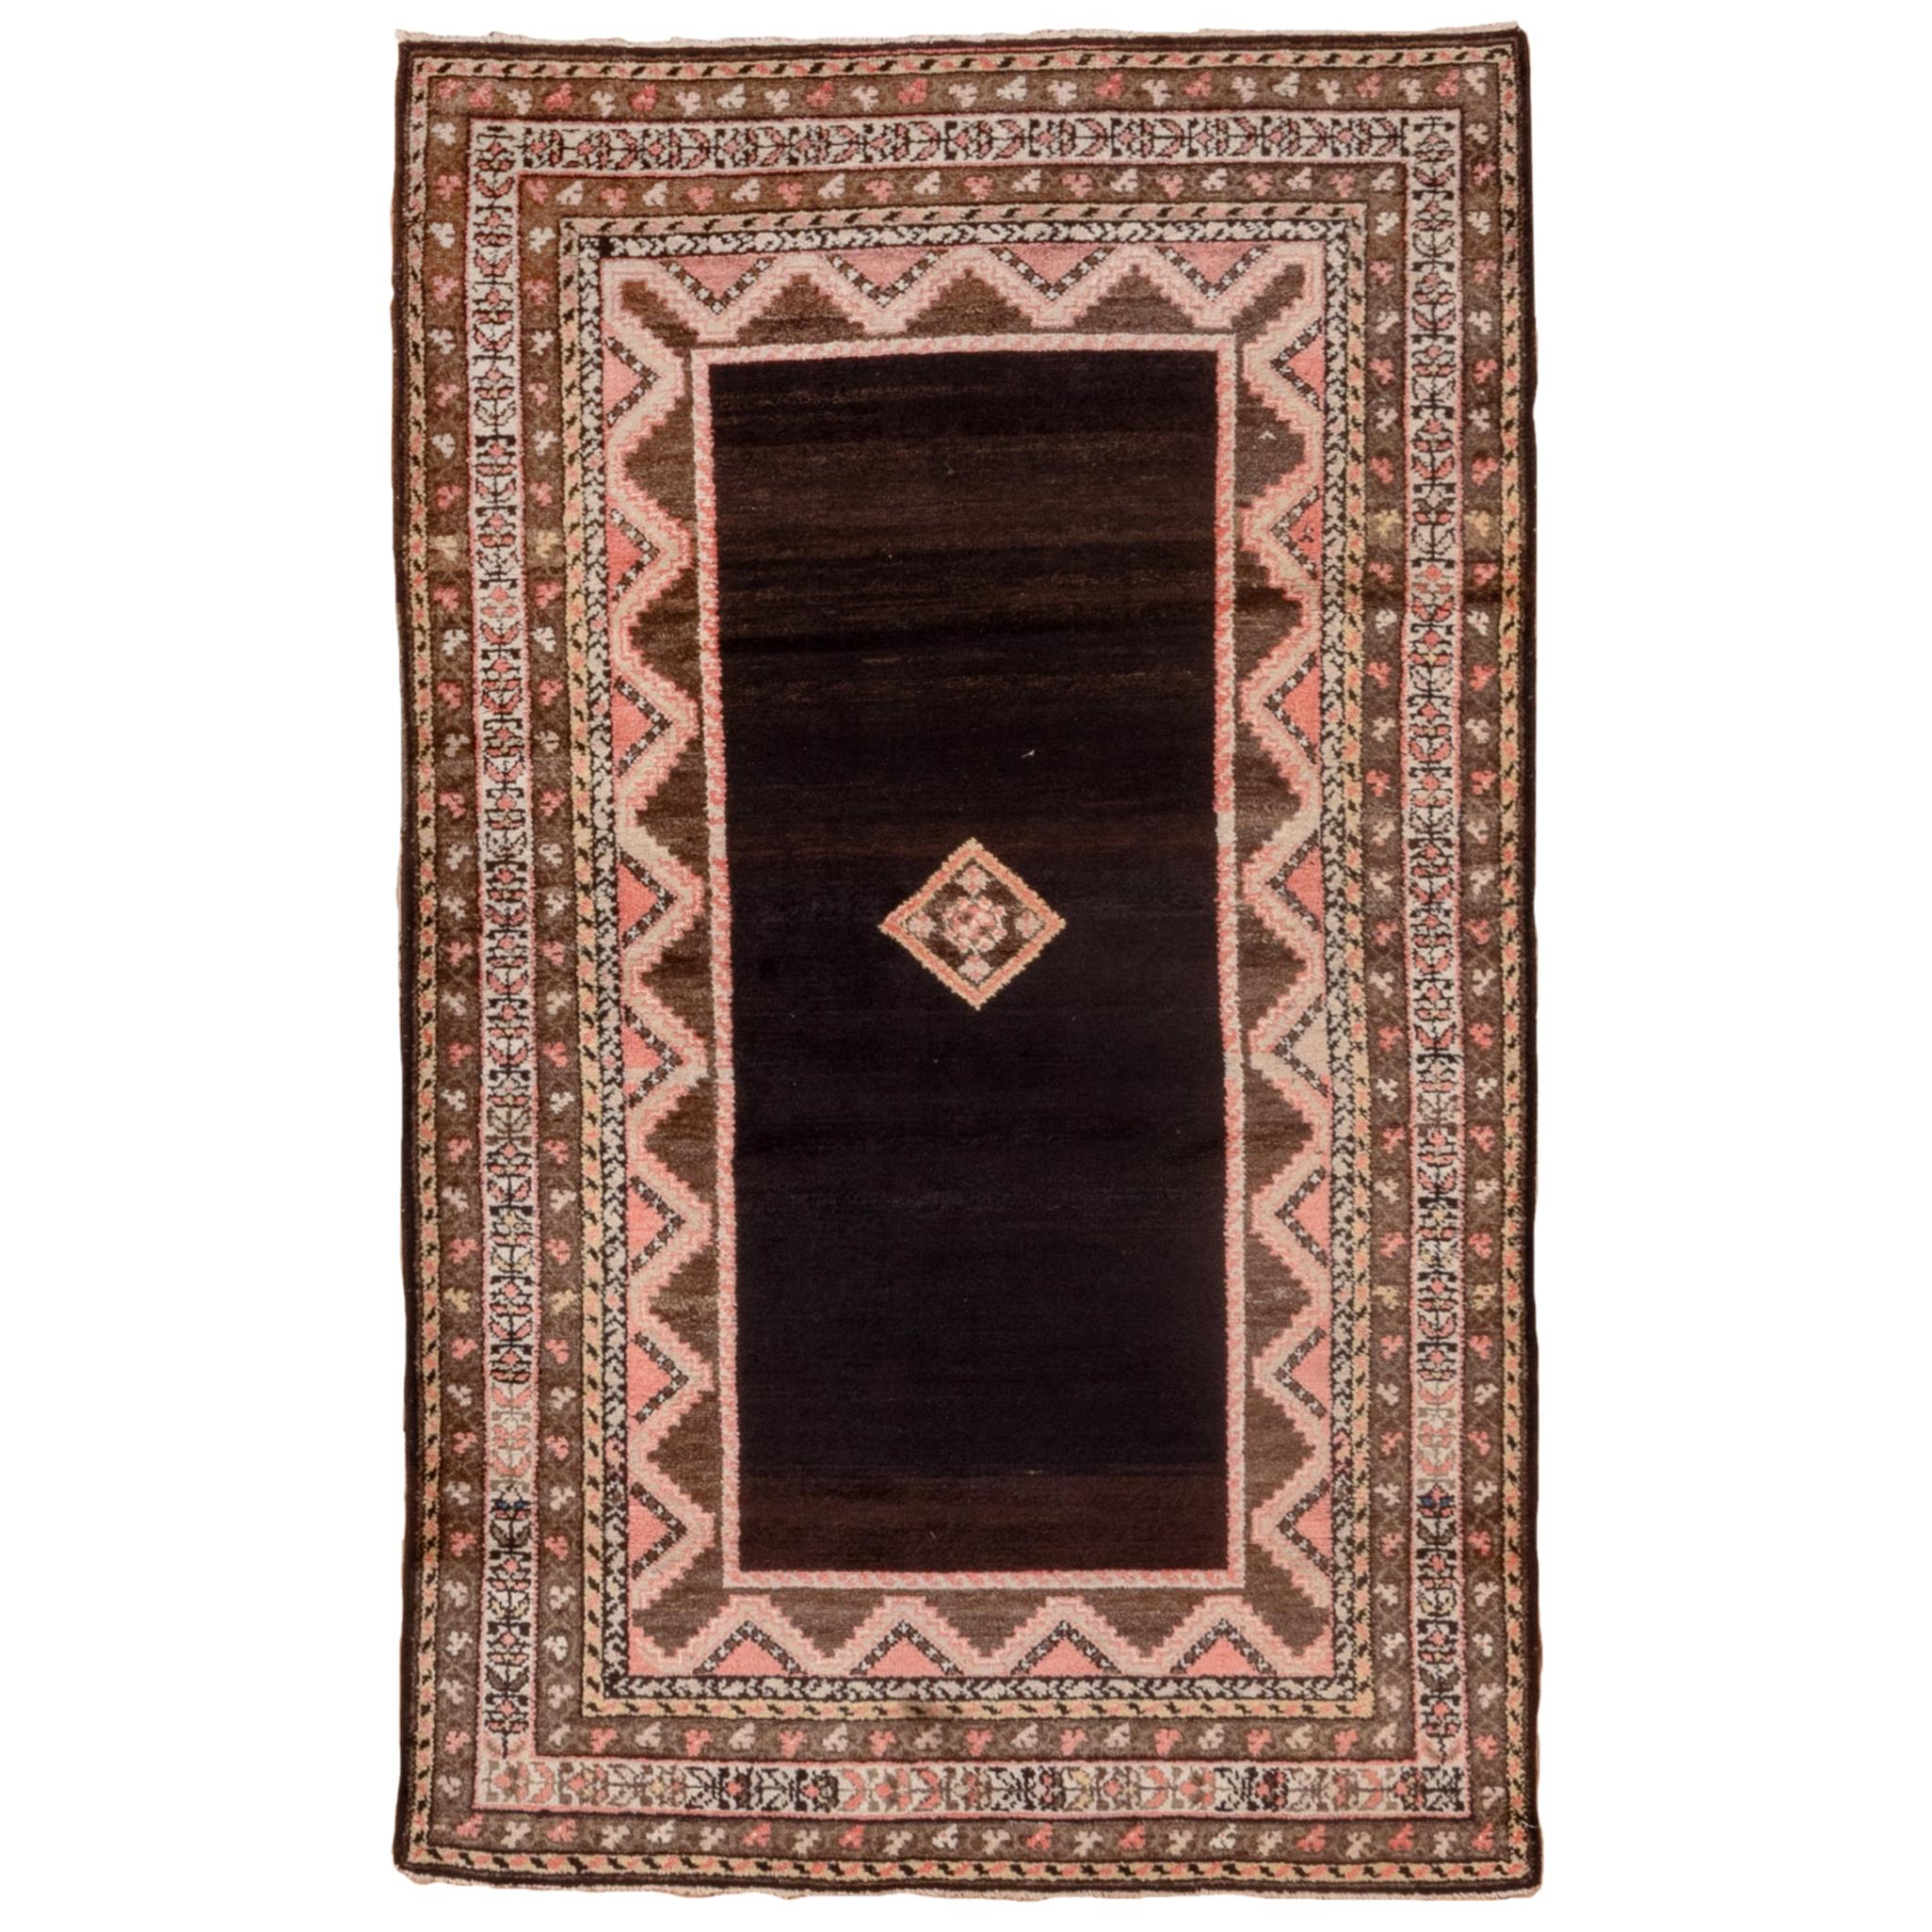 Antique Rustic Persian Hamadan Rug, Chocolate Brown Field, Pink Accents For Sale